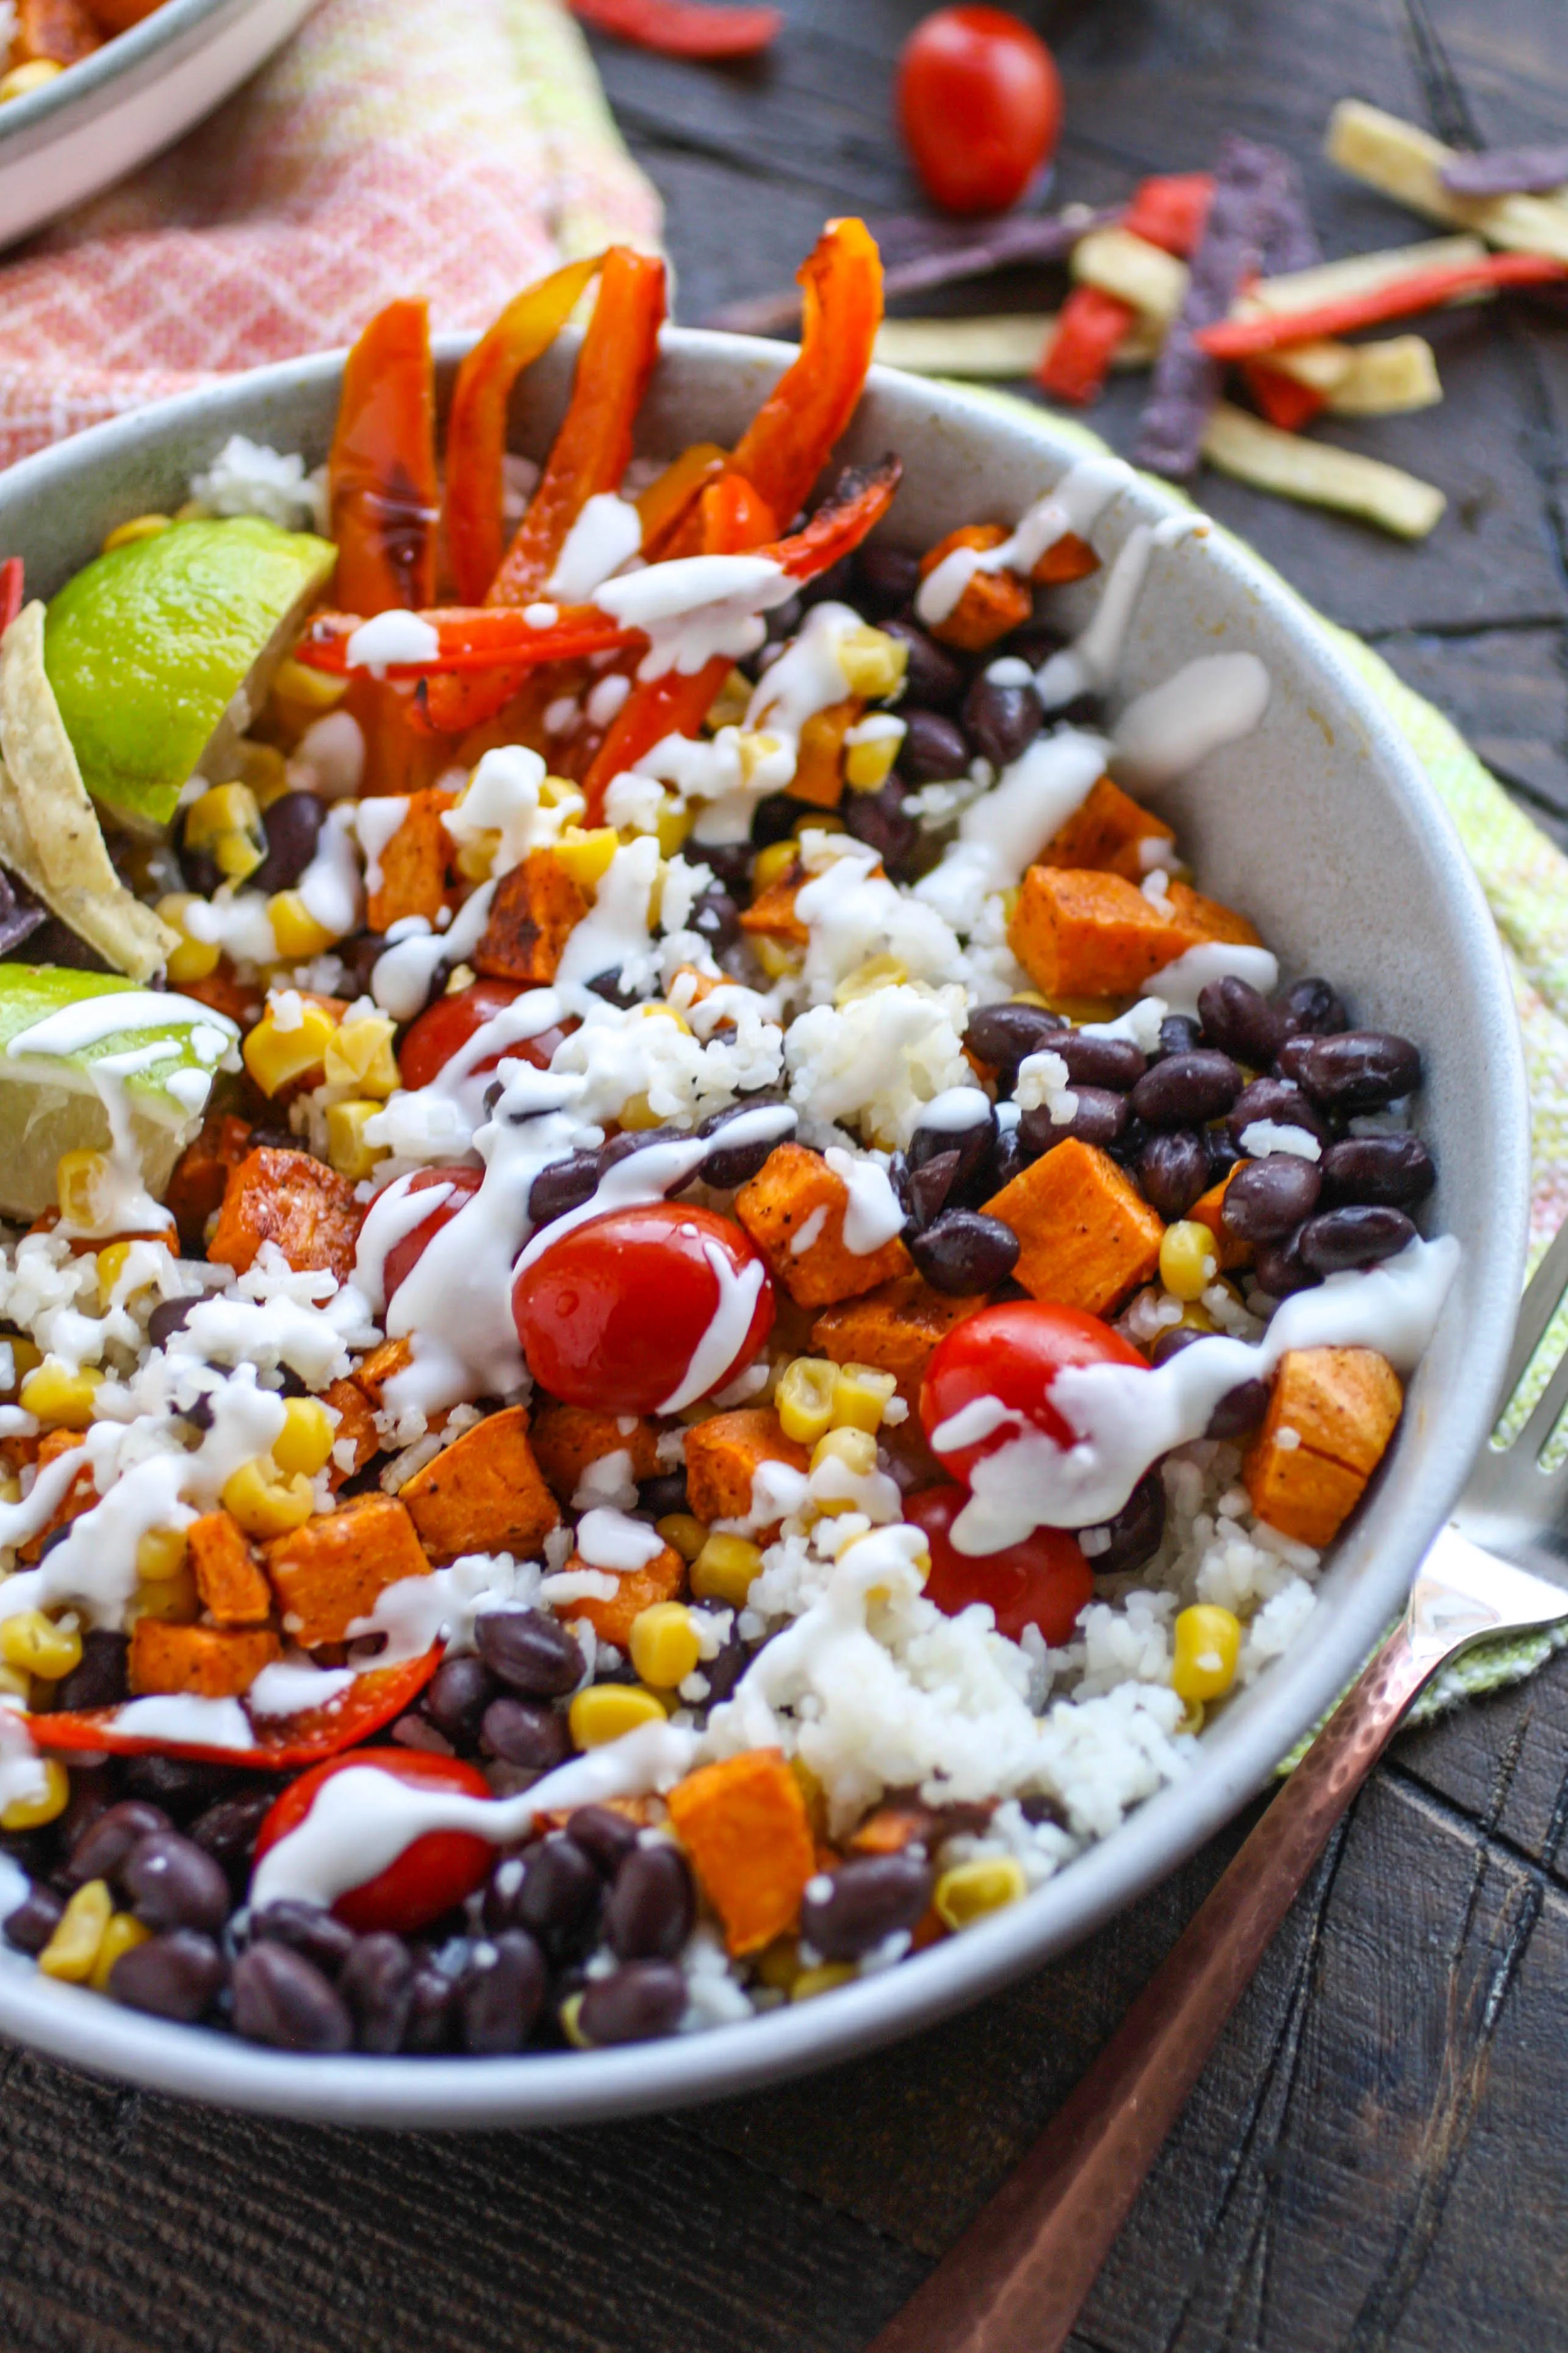 Easy Veggie and Black Bean Pantry Bowls are delicious and filling. You'll love these bowls made from kitchen staples!